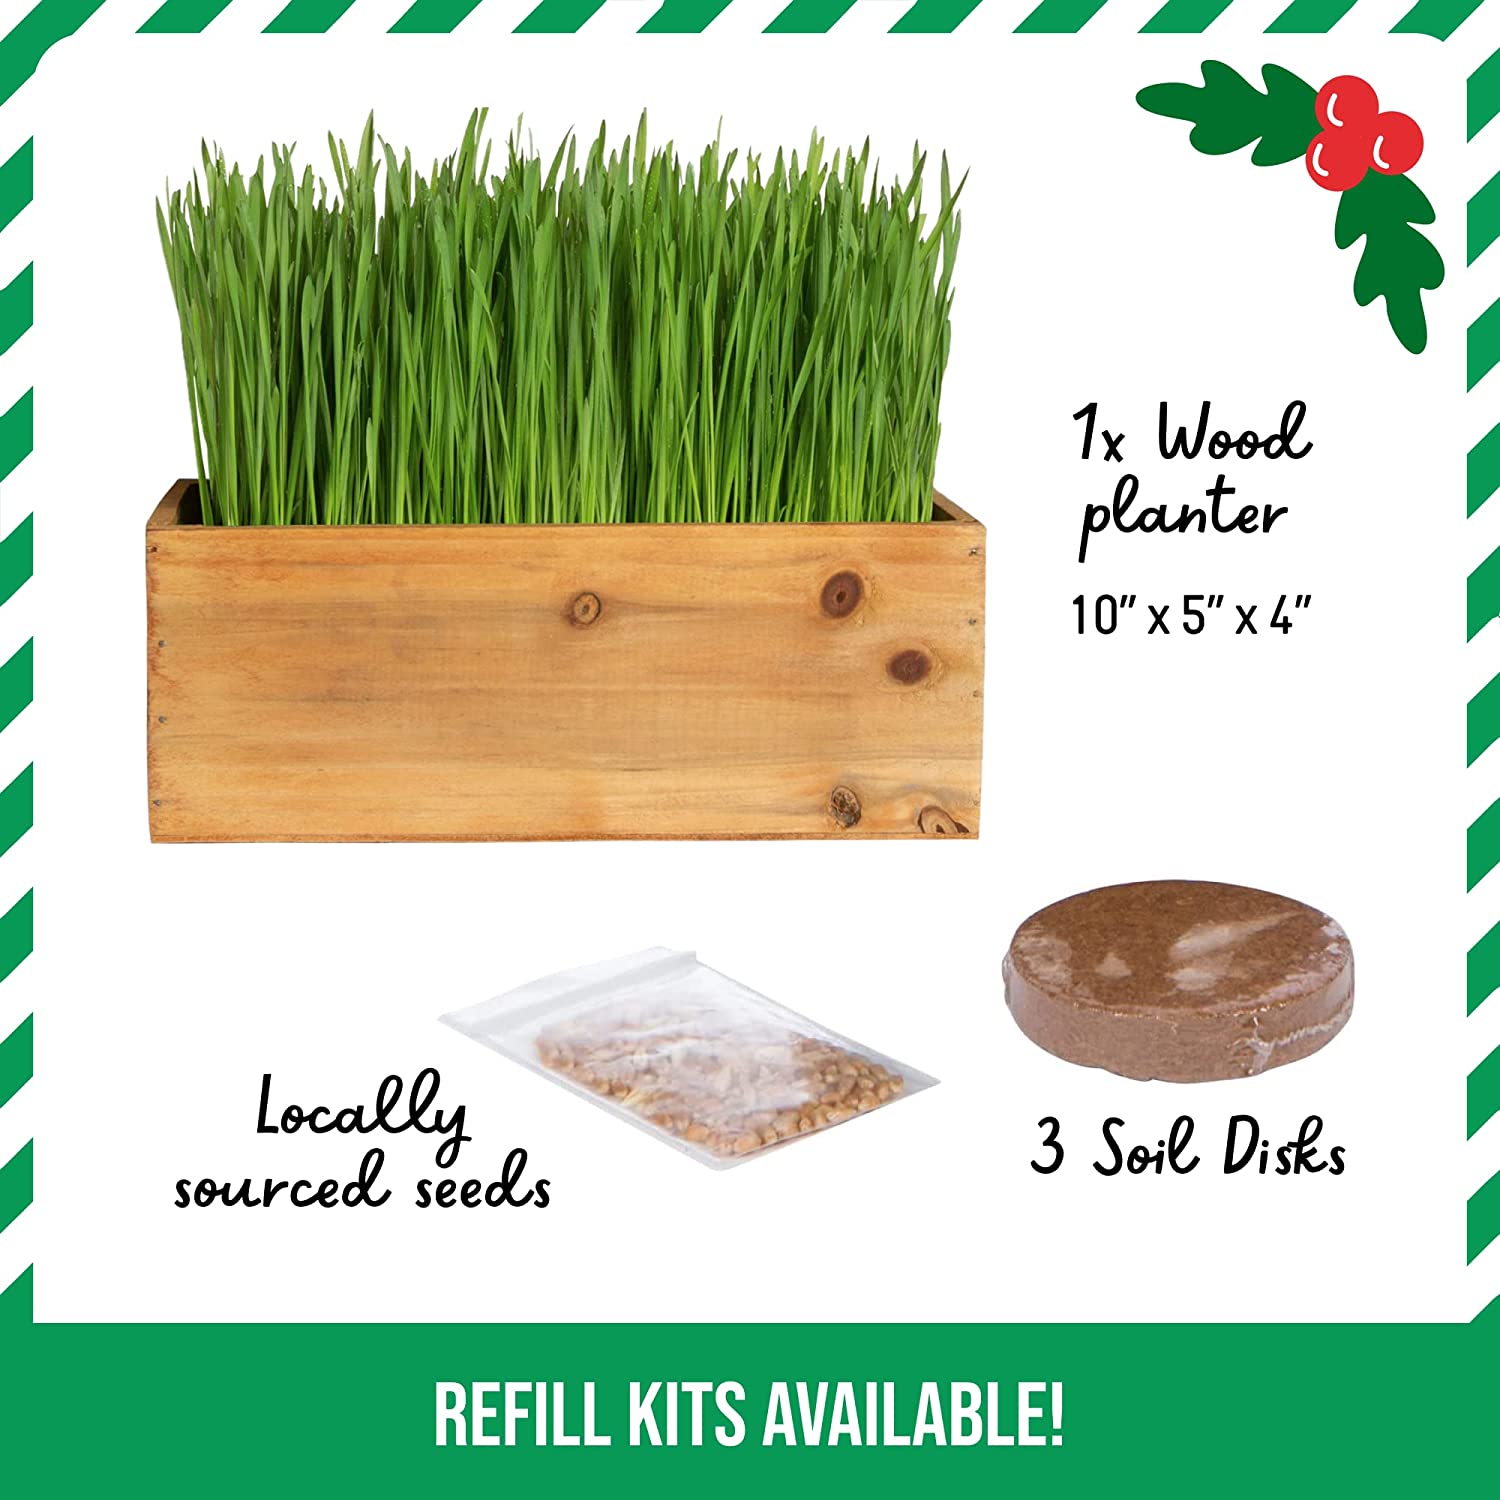 Cat Grass Kit (Organic) Complete with Rustic Wood Planter, Seed and Soil. Easy to Grow - Great for Indoor or Outdoor Cat, Dogs and Other Pets. Prevent Hairballs and Aid Digestion?